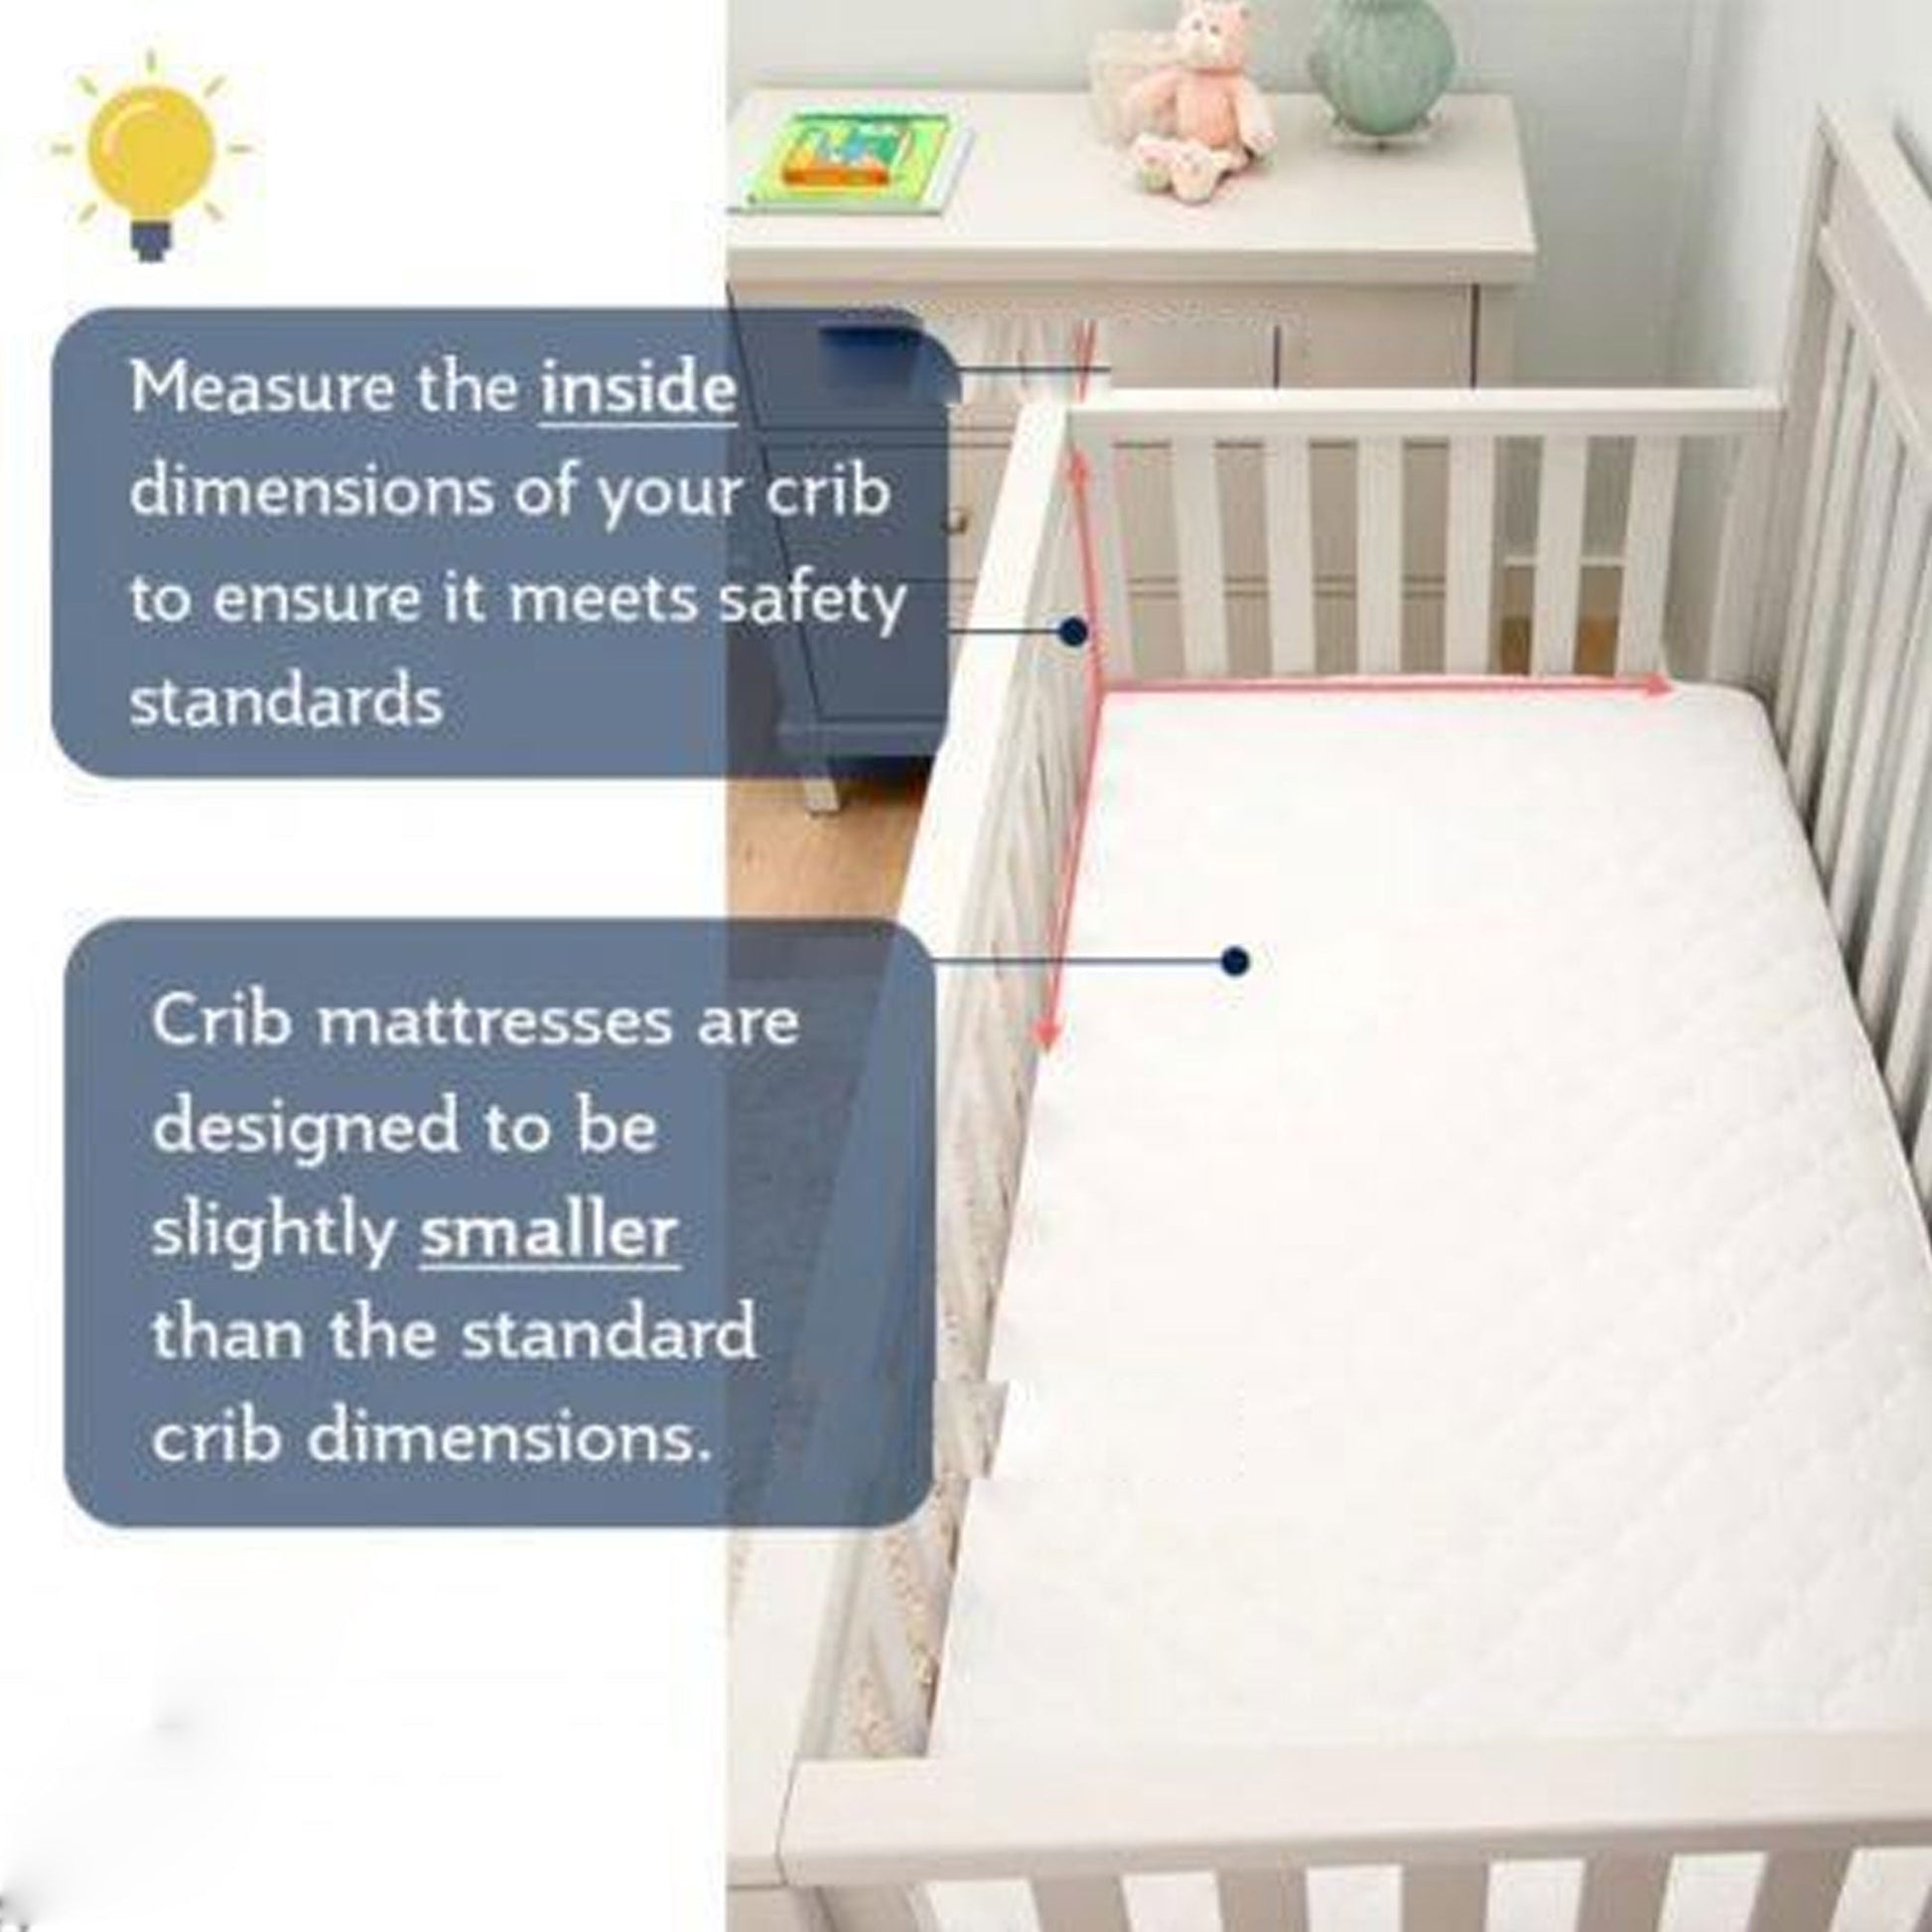 89 X 40 X 4 CM - CRIB Breathable Quilted Cot Baby Mattress - TheComfortshop.co.ukNursery Bedding0721718957287thecomfortshopTheComfortshop.co.ukCrib 89 x 4089 X 40 X 4 CM - CRIB Breathable Quilted Cot Baby Mattress - TheComfortshop.co.uk